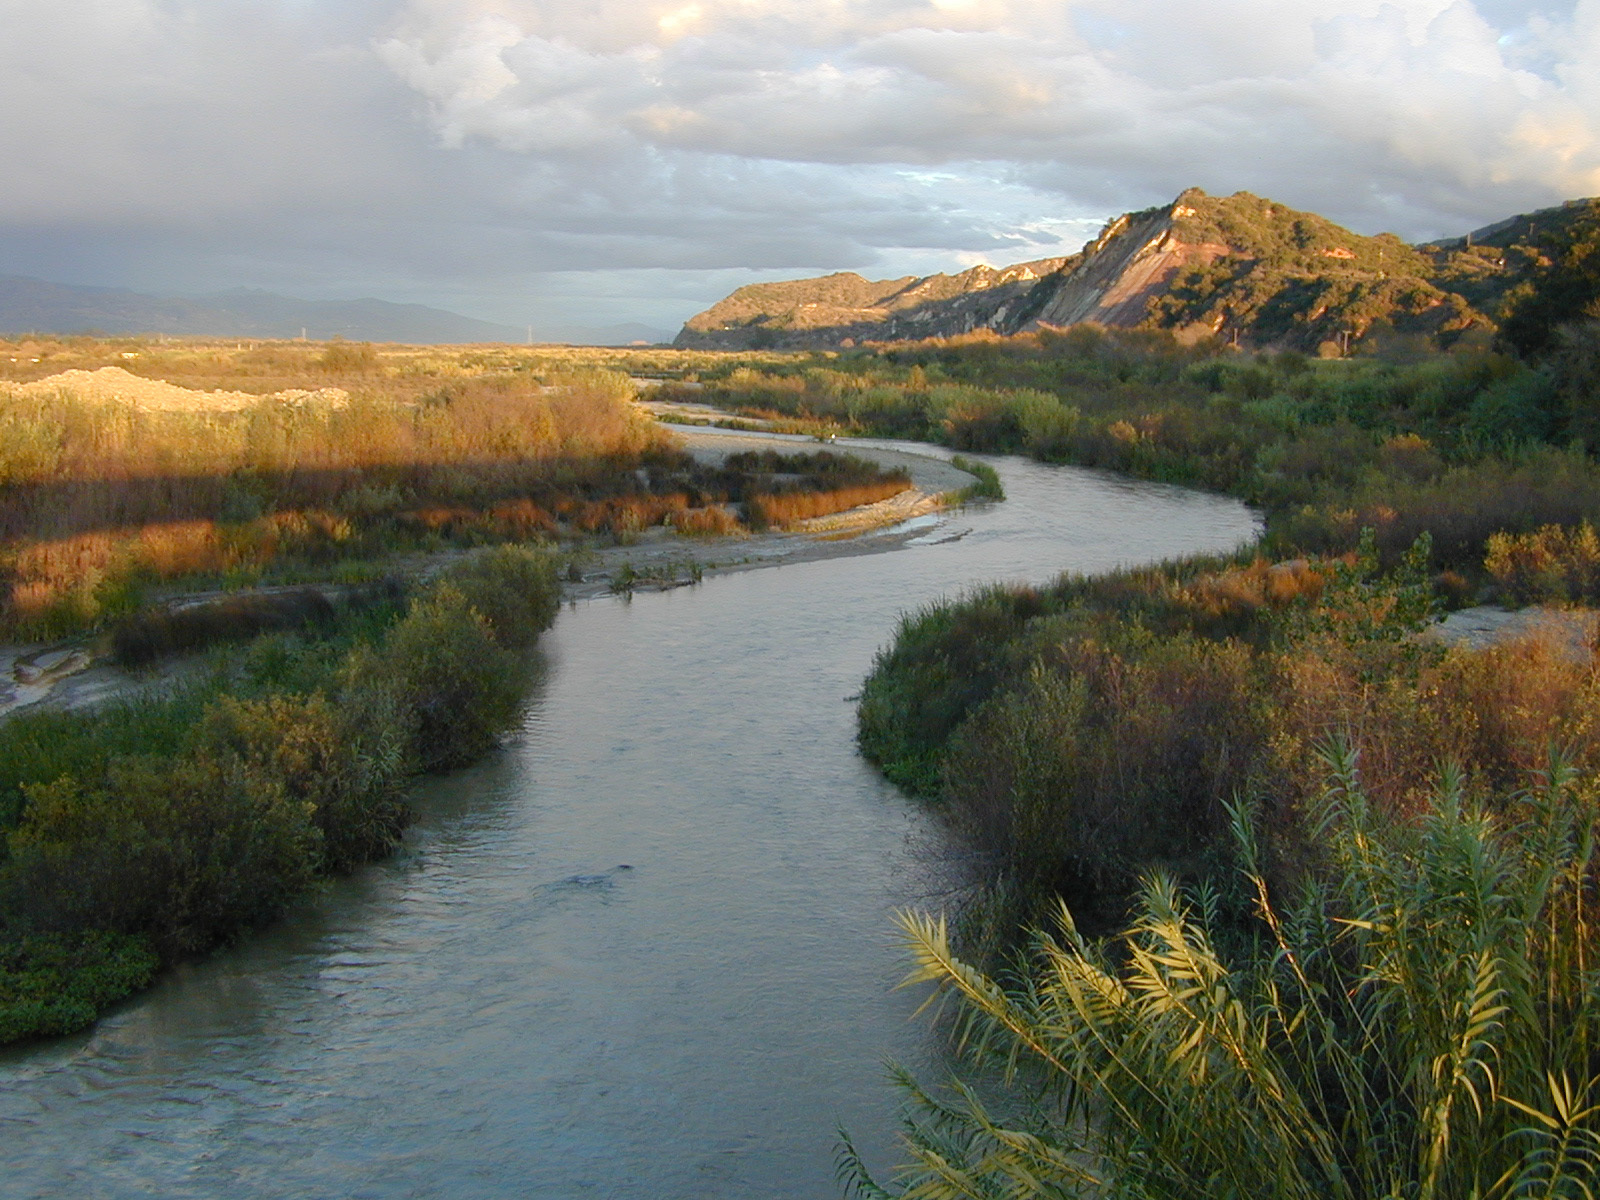 The Santa Clara River winds through a scrubby, tree-filled landscape with a mountain in the background.